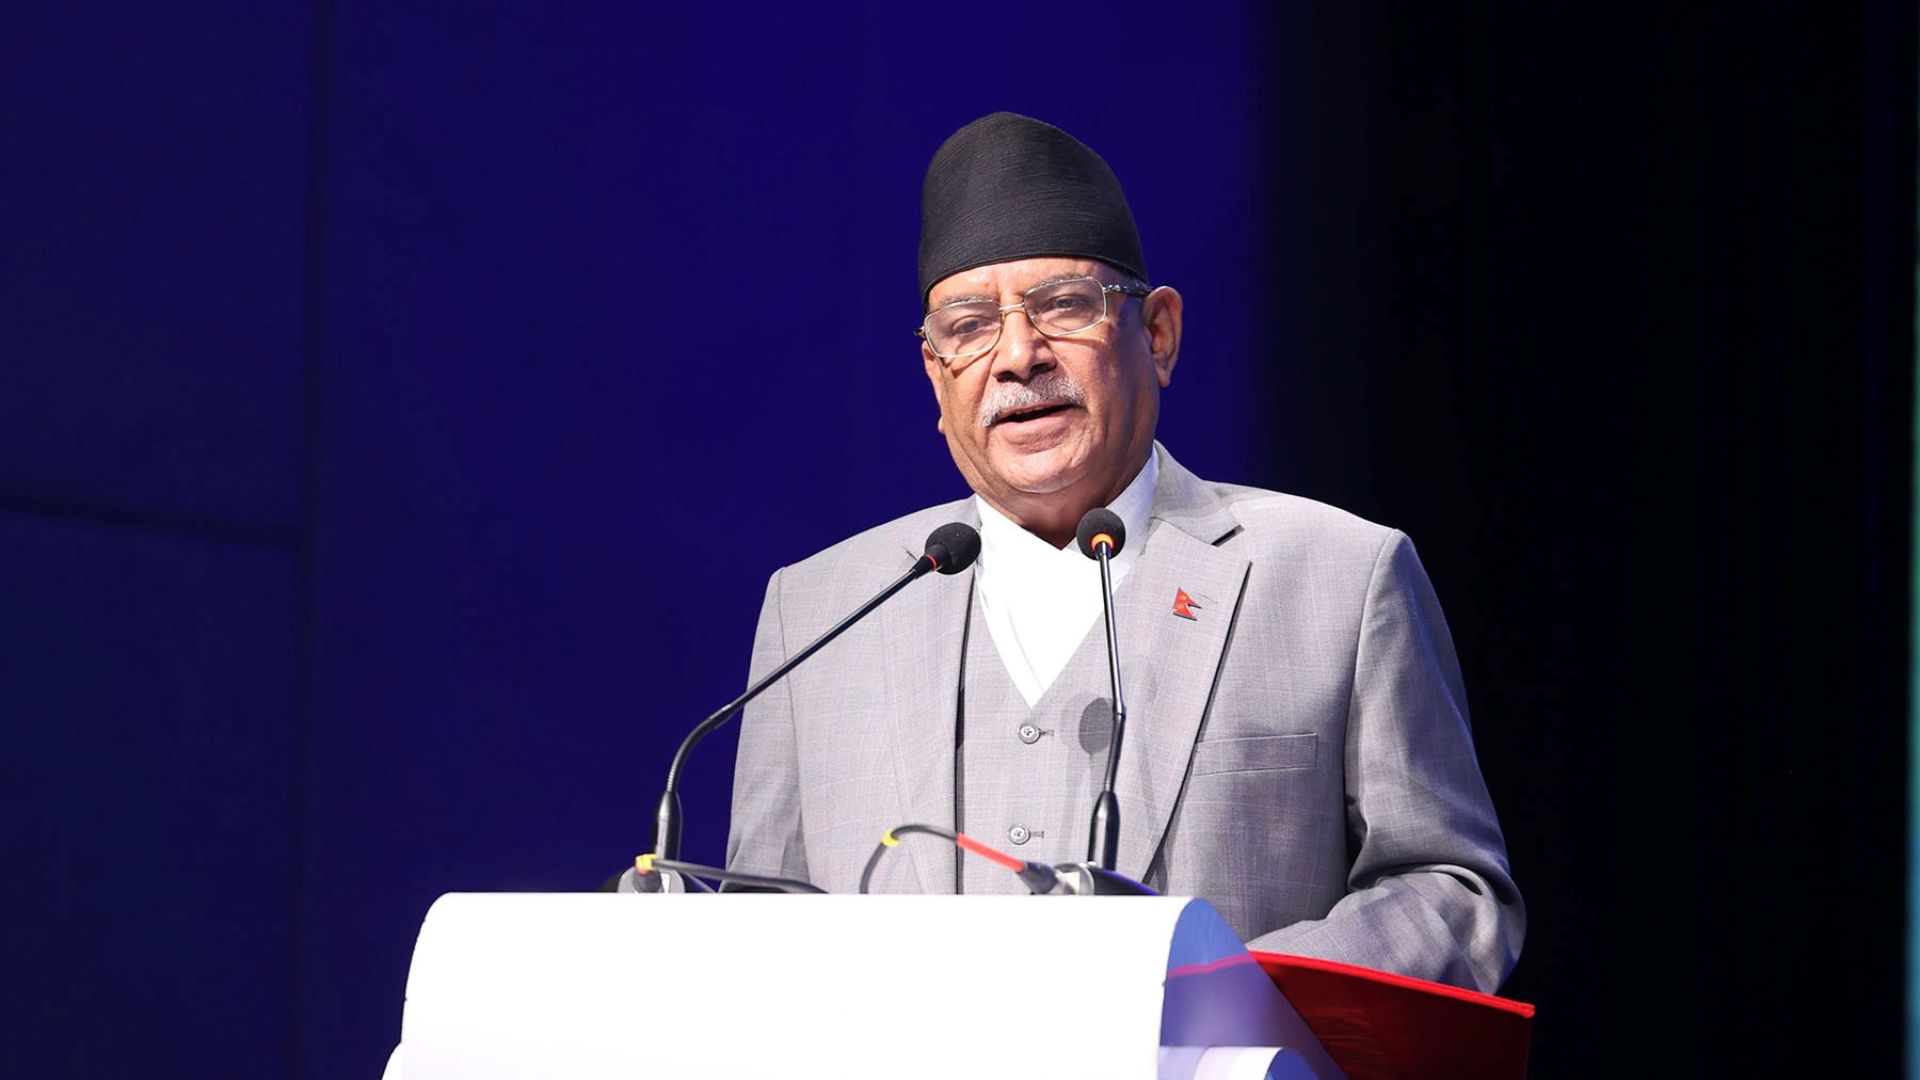 Nepal is committed to liberal economic policy, you are welcome to invest here: PM Dahal   